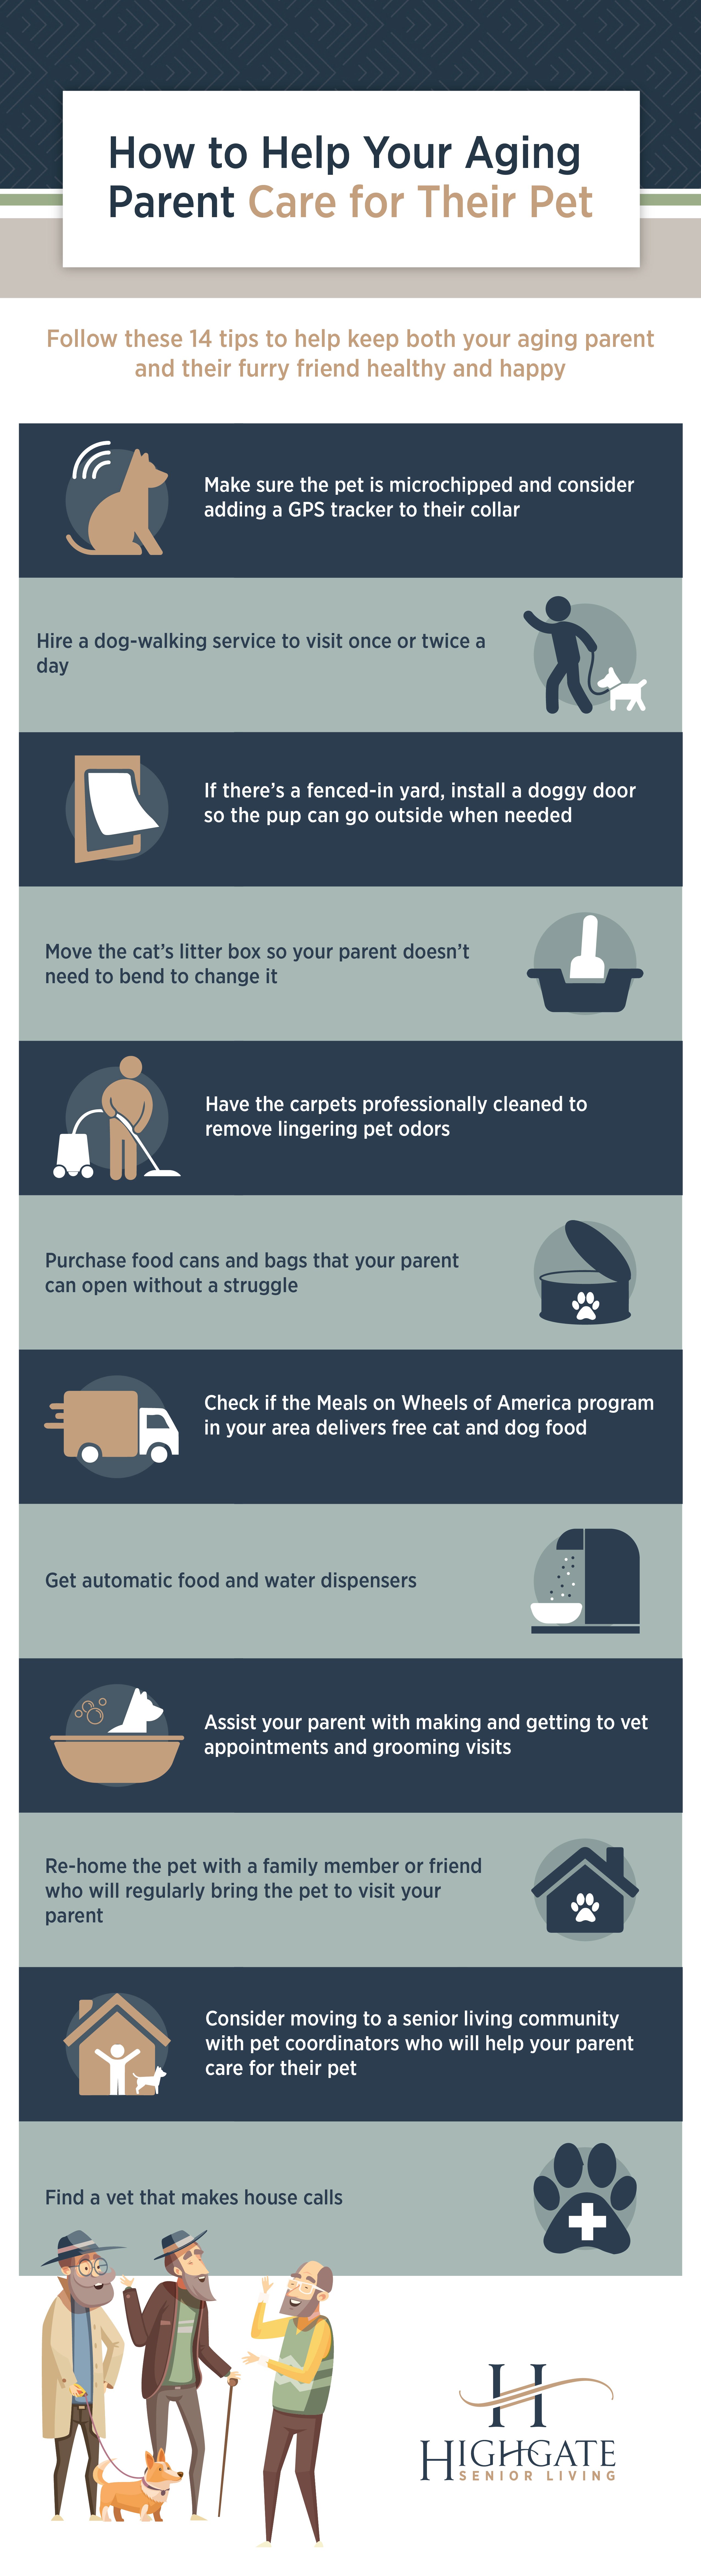 Infographic: How to Help Your Aging Parent Care for Their Pet